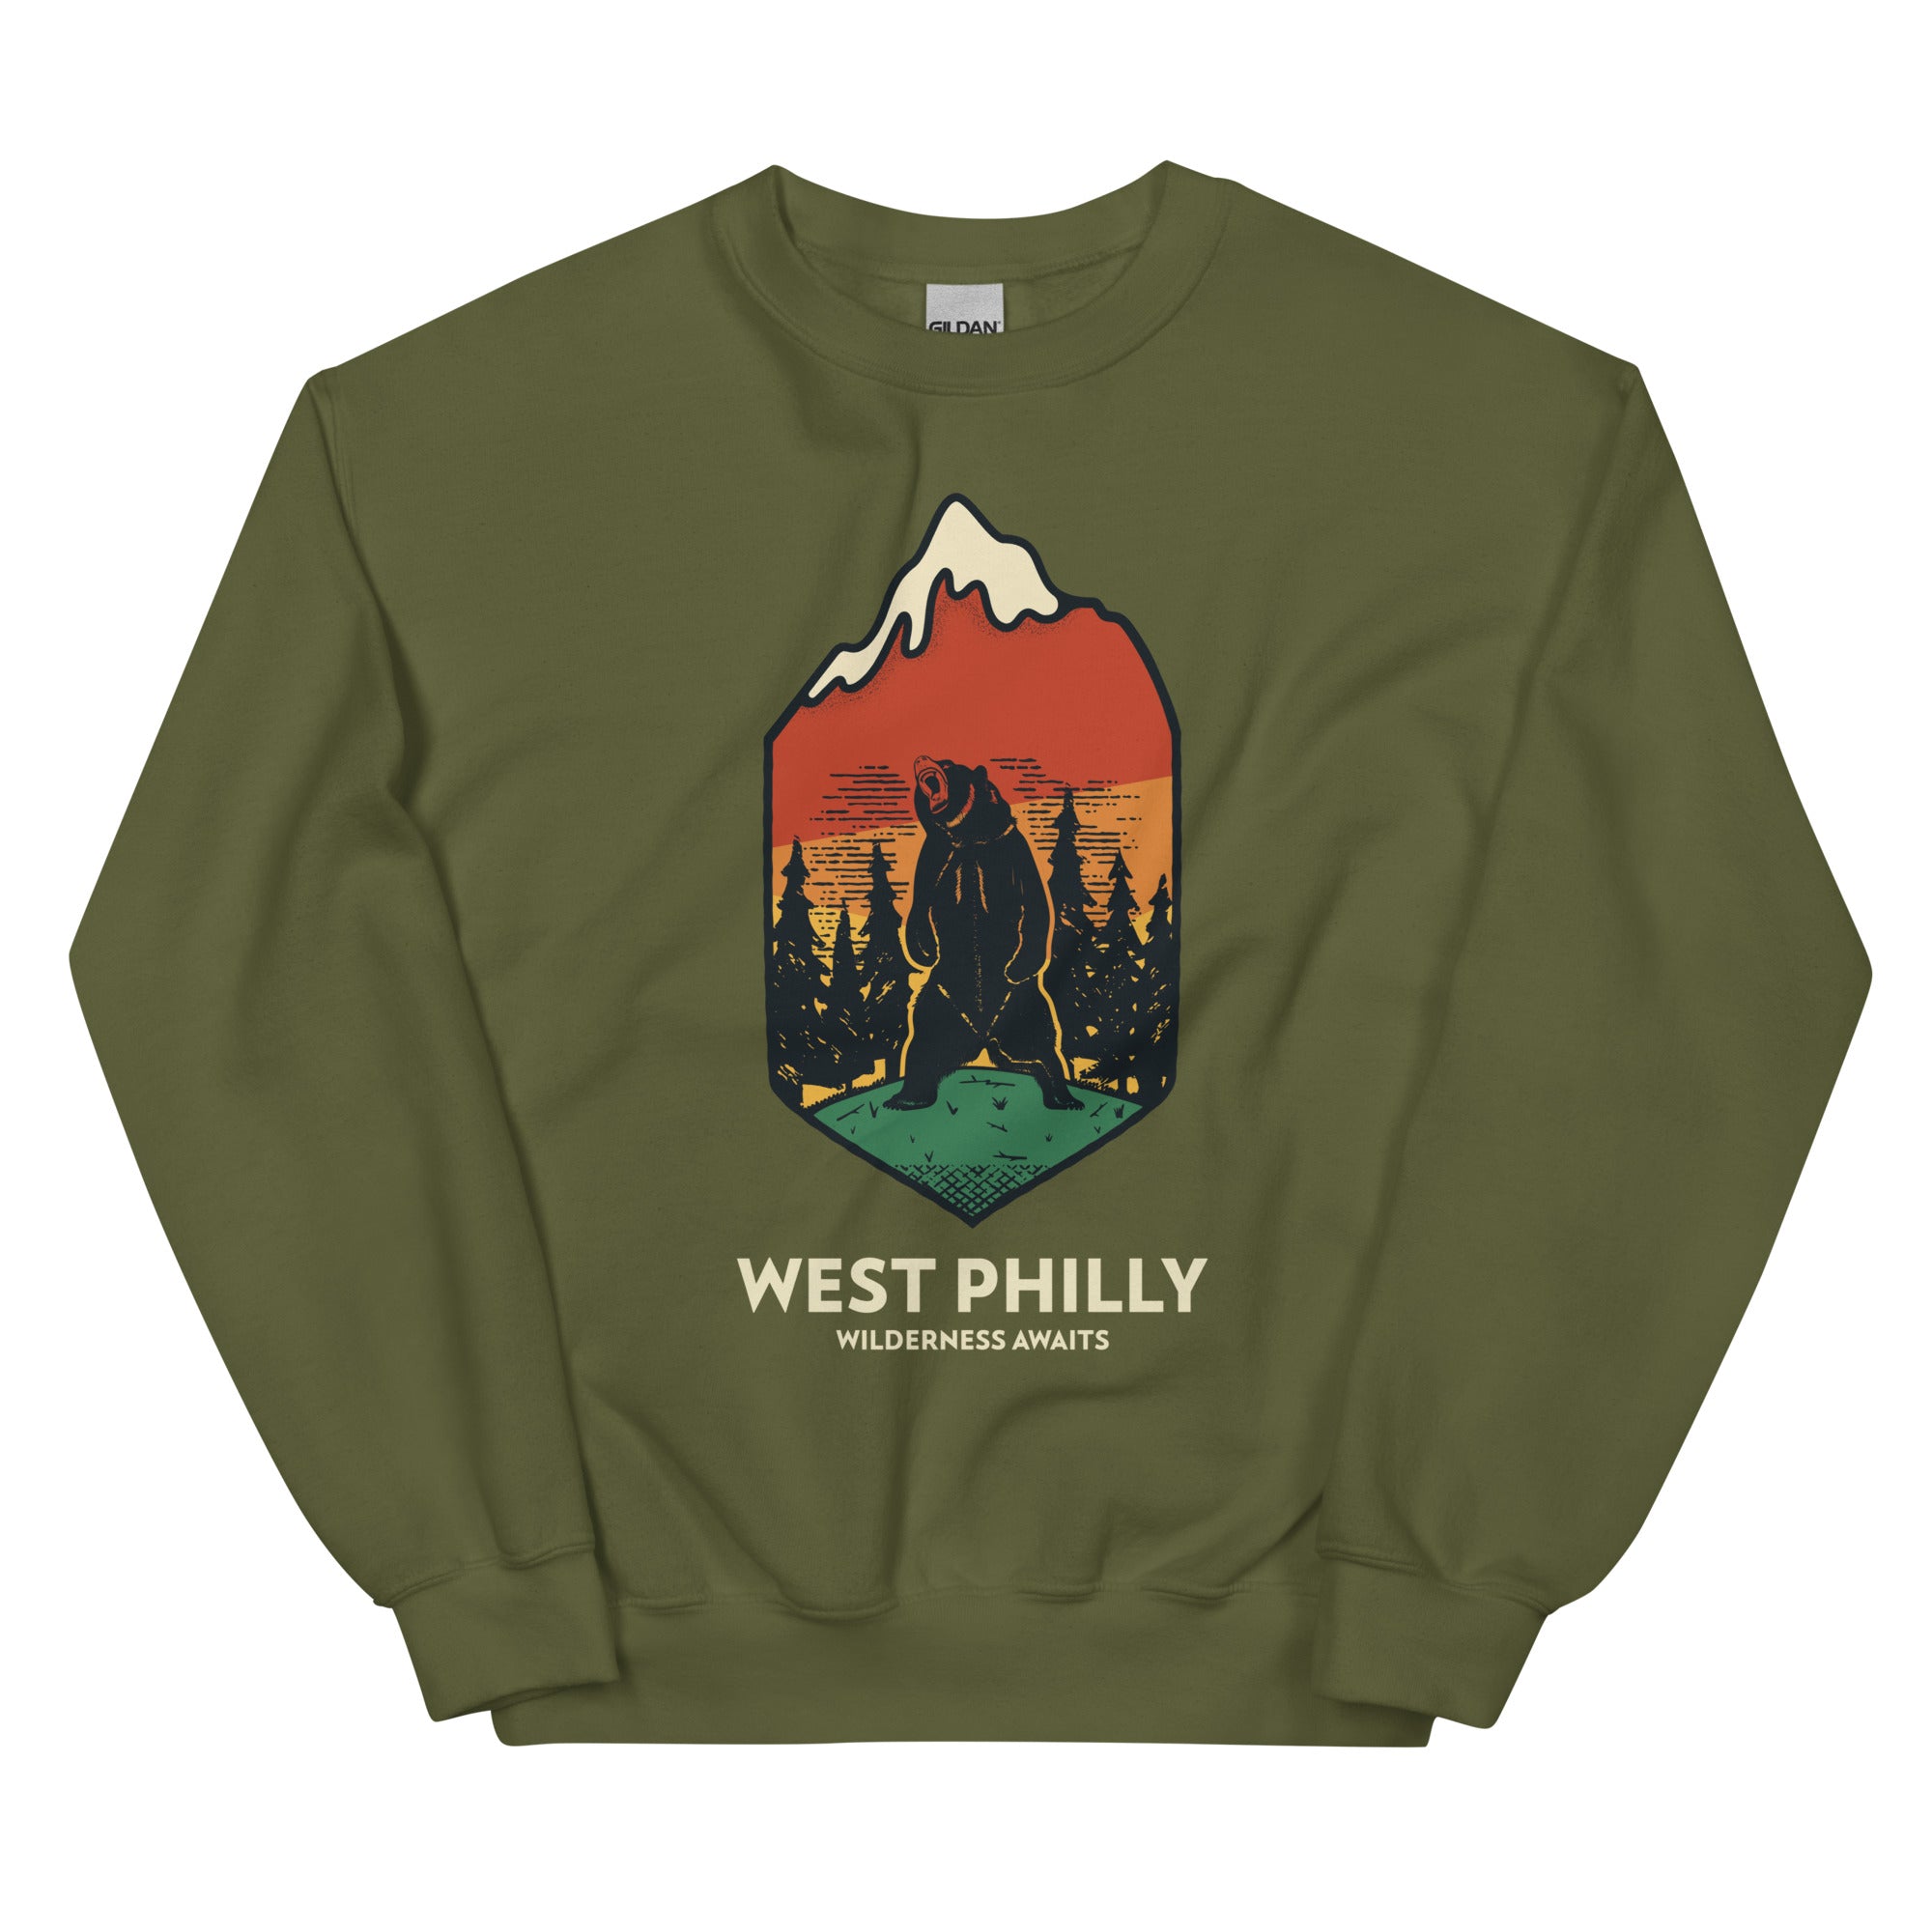 West Philly Wilderness Philadelphia outdoors army green sweatshirt Phillygoat